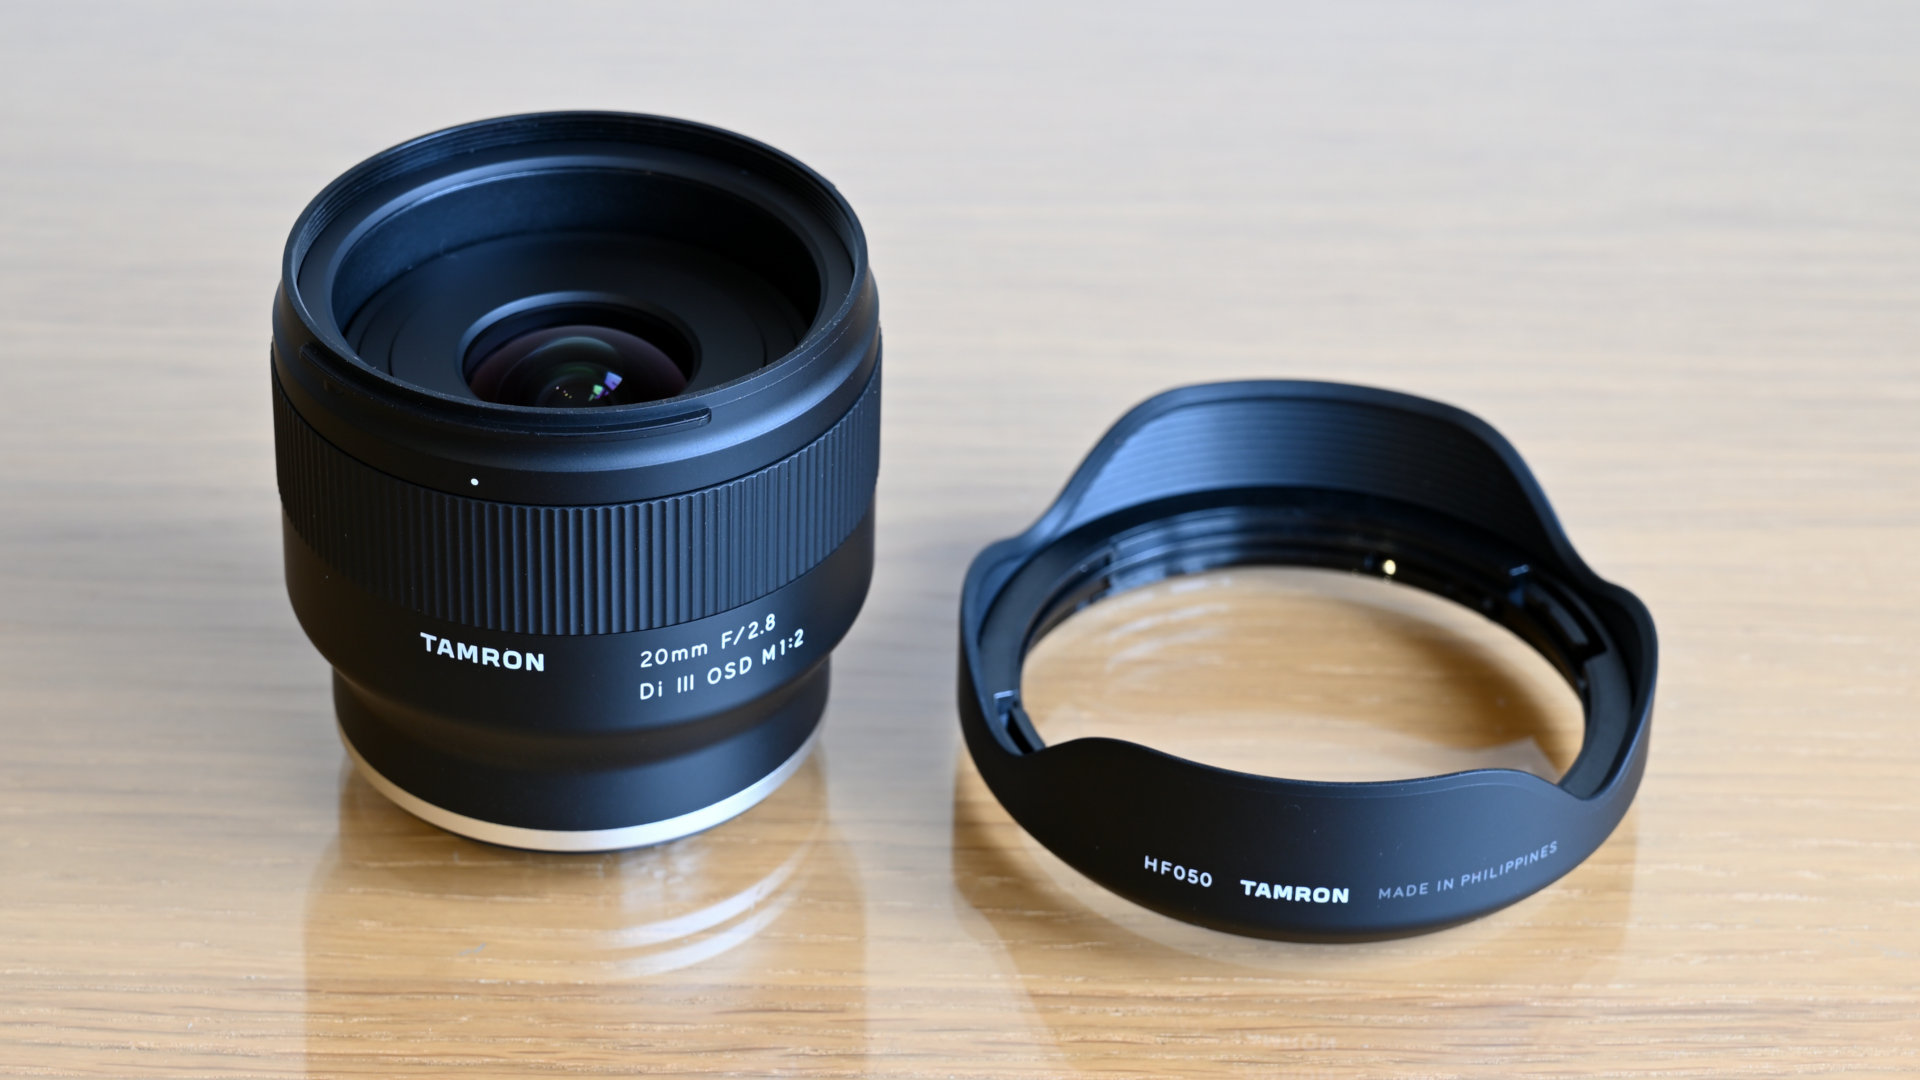 Best lenses for Sony A6400: Tamron 20mm f/2.8 Di III OSD